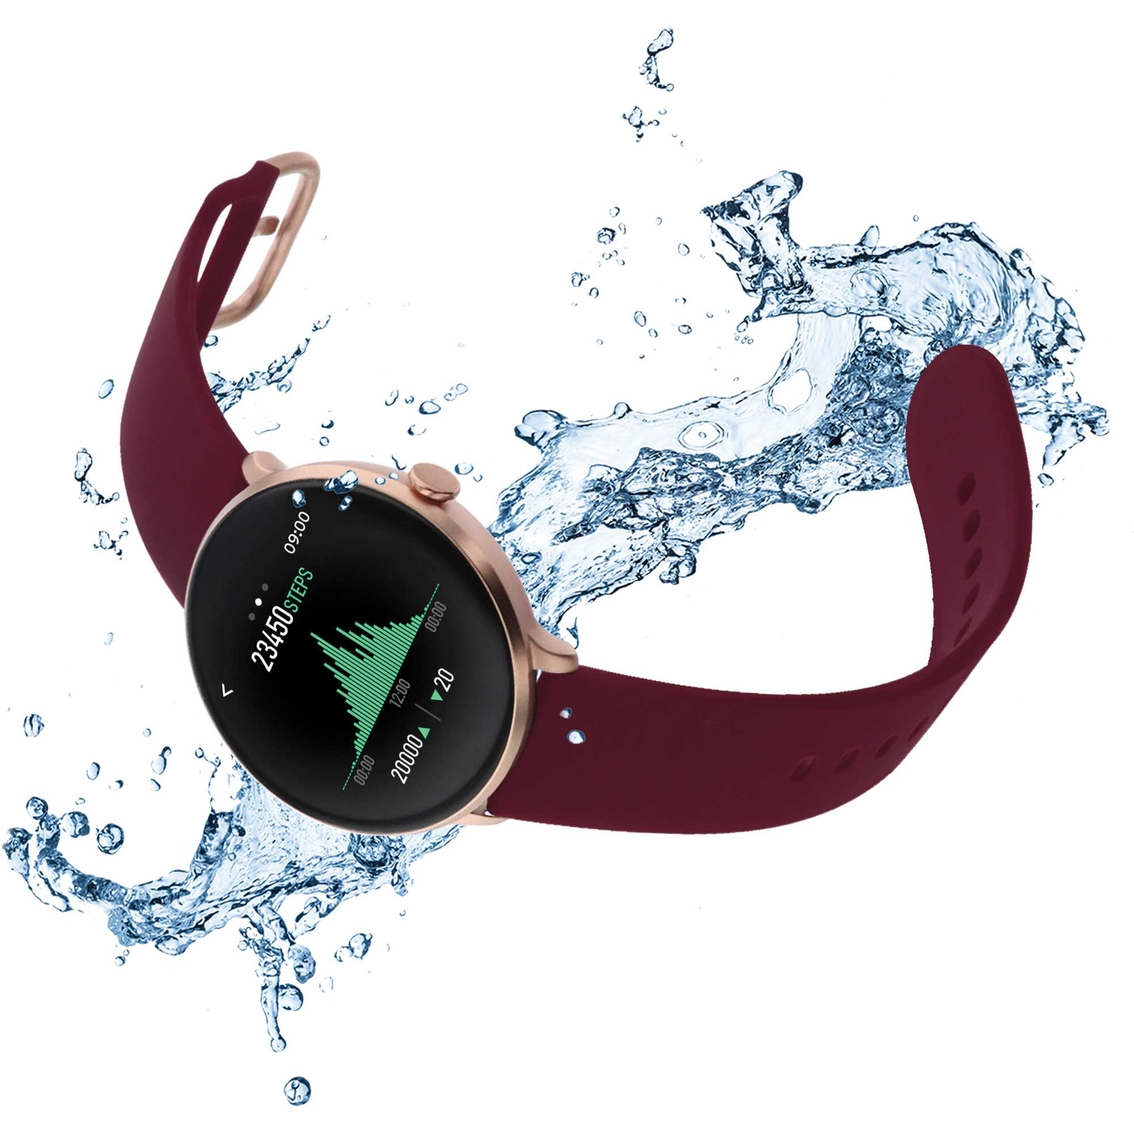 iTouch Sport 3 Smartwatch: Rose Gold Case, Merlot Strap 500015R-51-C10 - Image 5 of 7